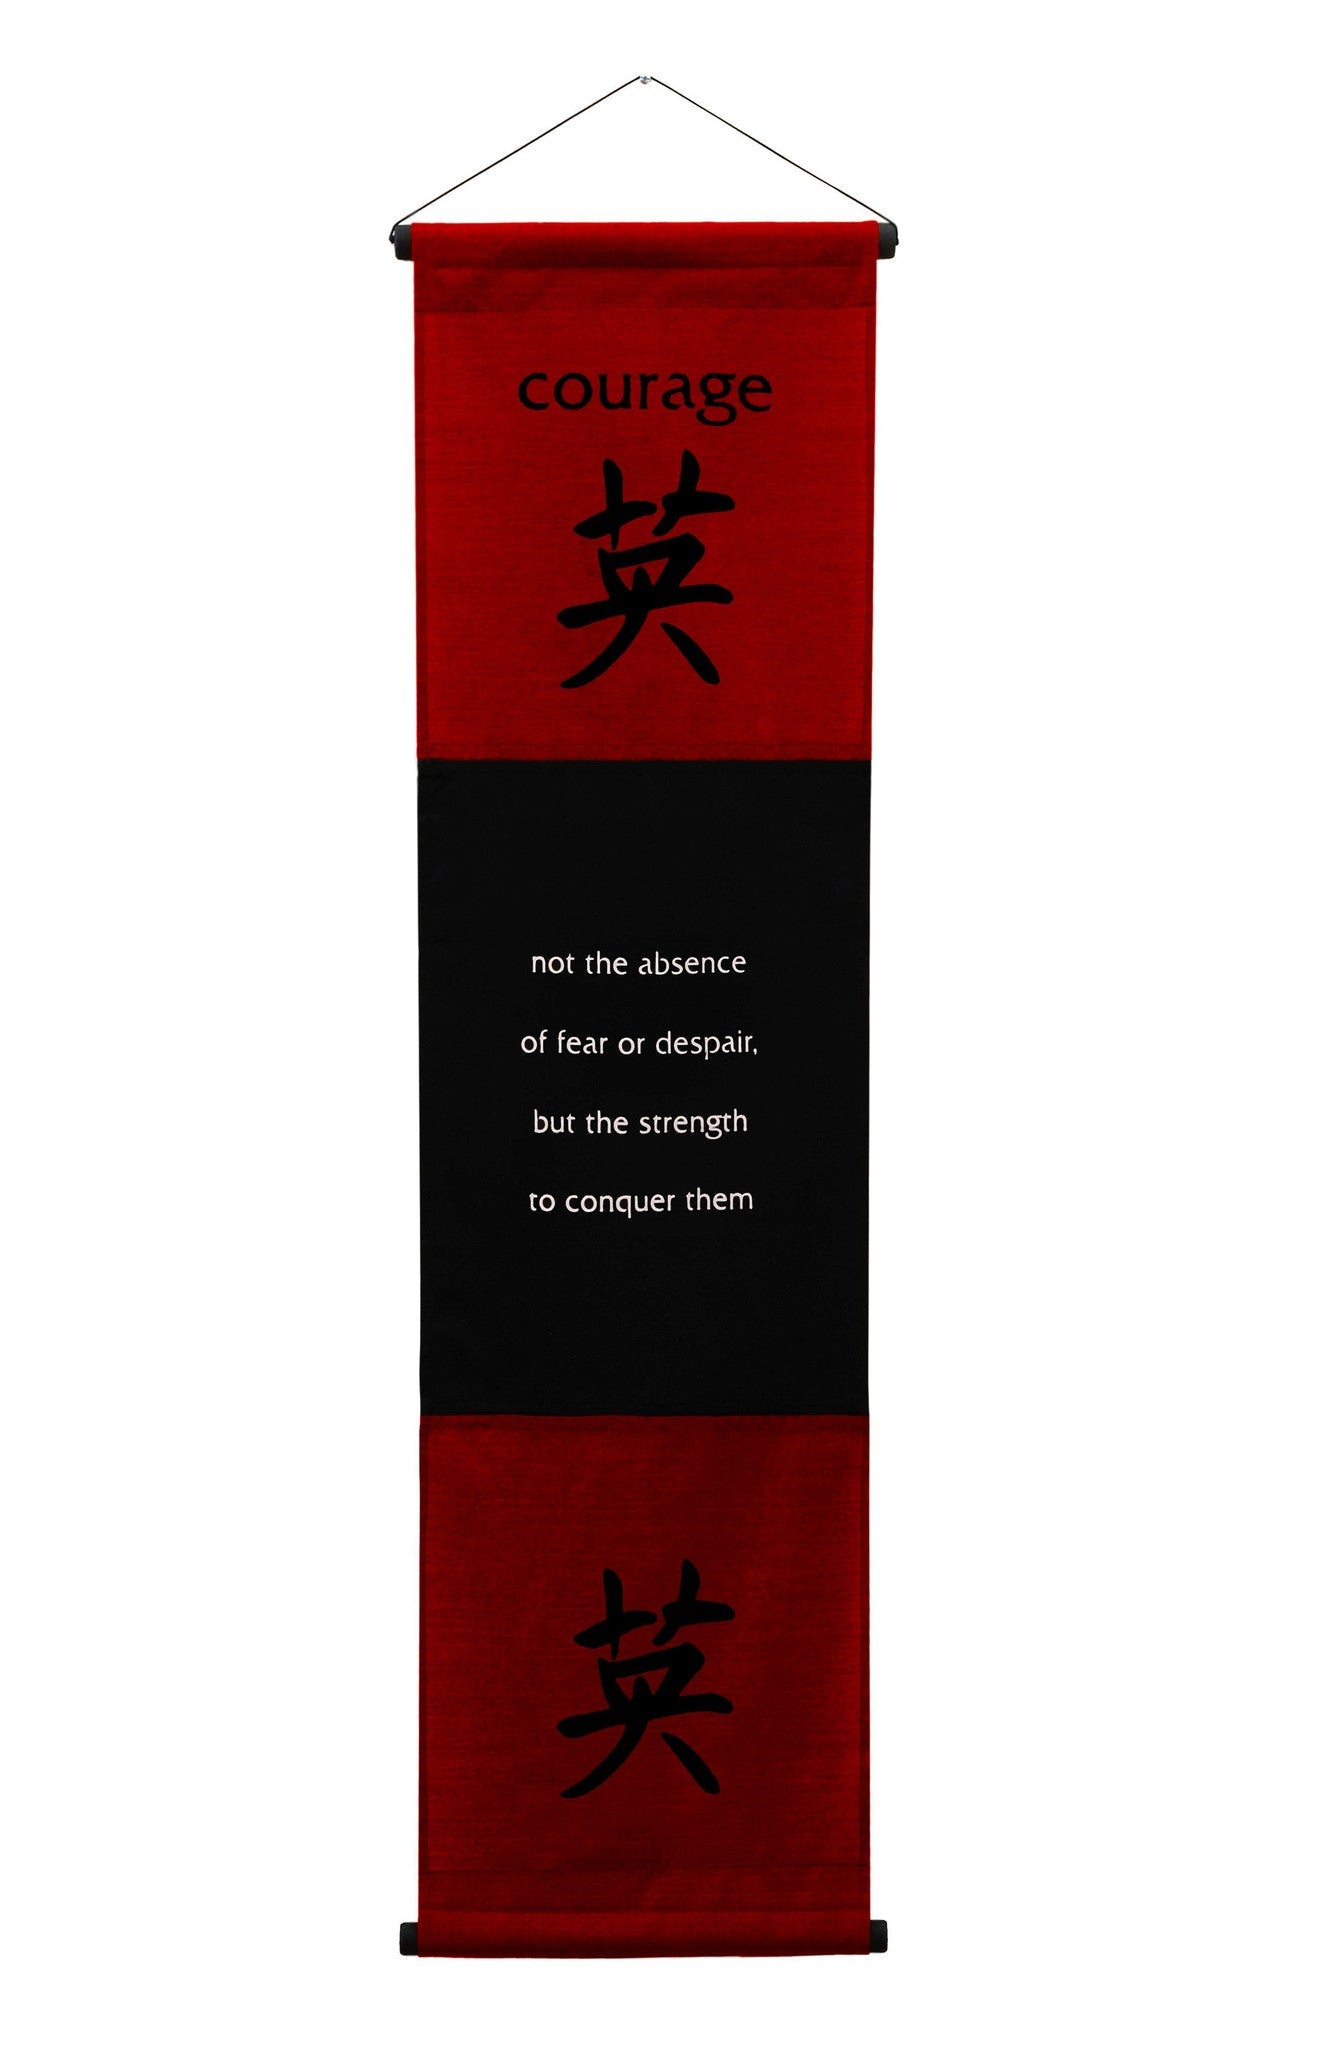 Inspirational Wall Decor "Courage" Banner Large, Inspiring Quote Wall Hanging Scroll, Affirmation Motivational Uplifting Art Decoration, Thought Saying Tapestry red